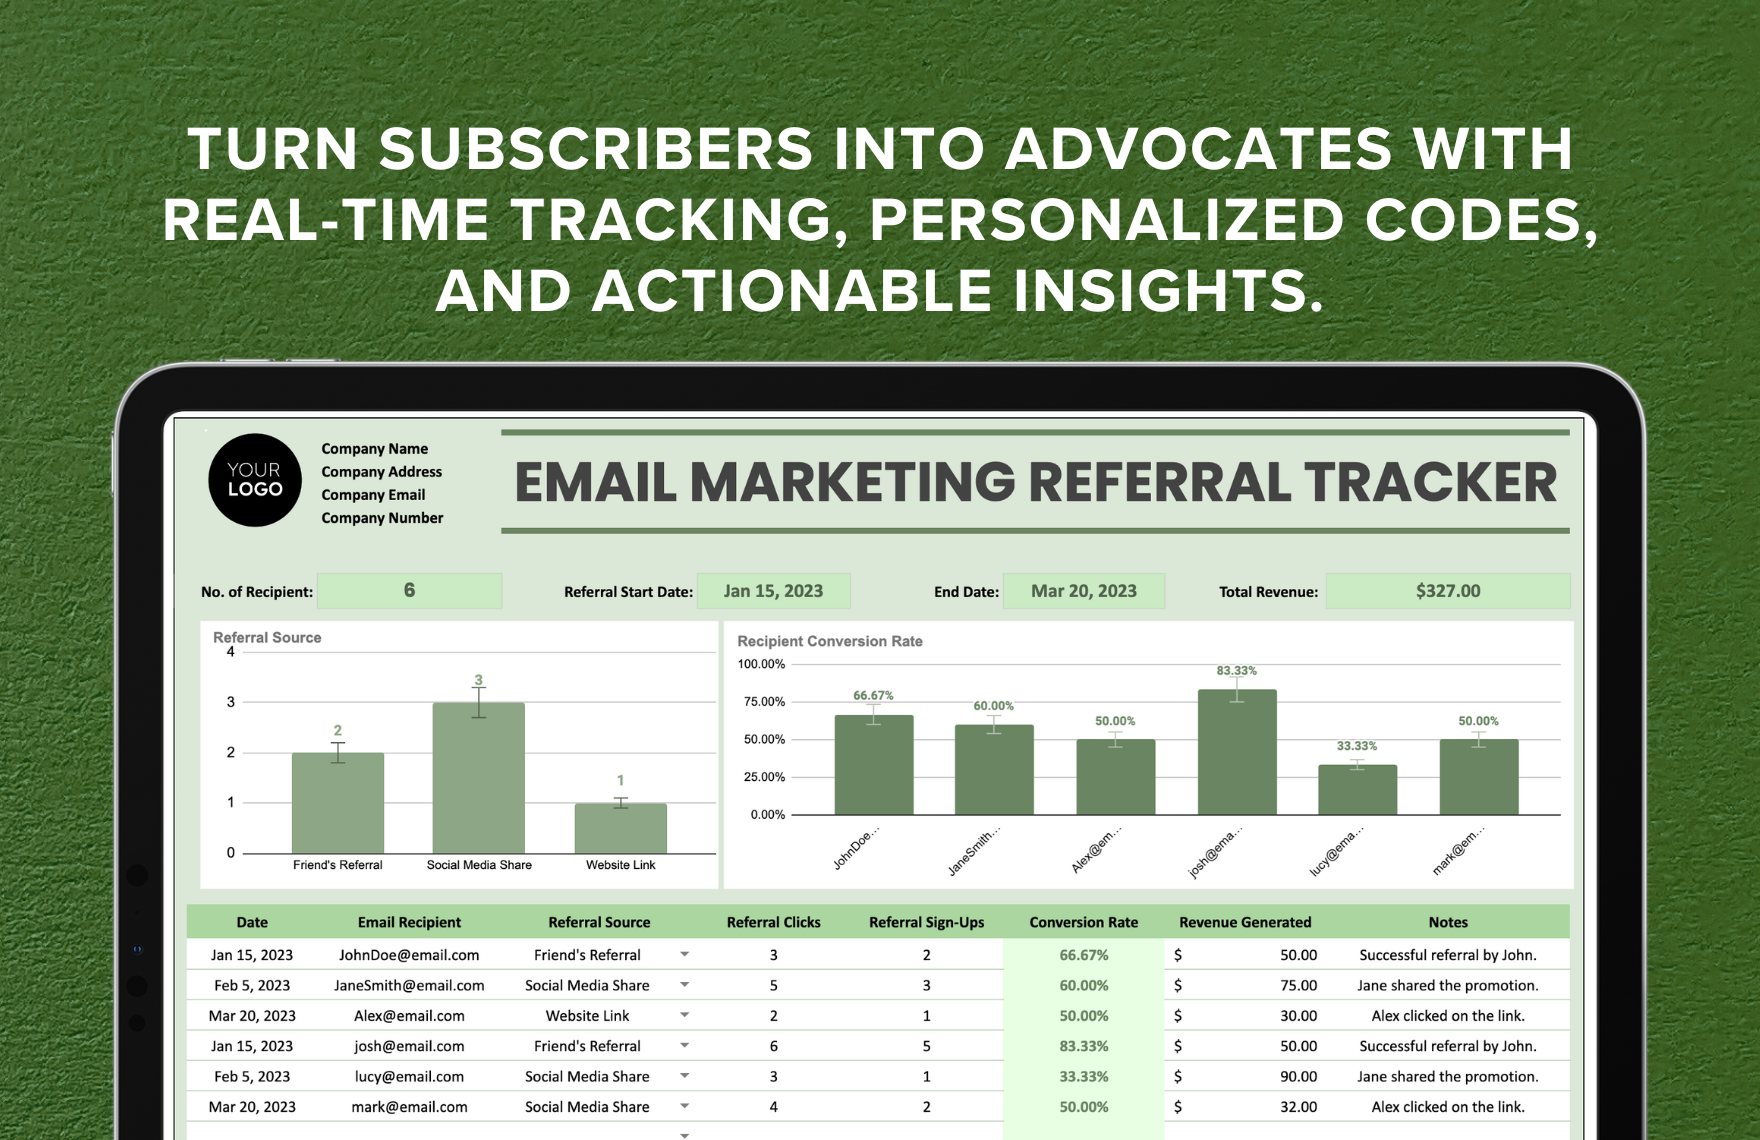 Email Marketing Referral Tracker Template